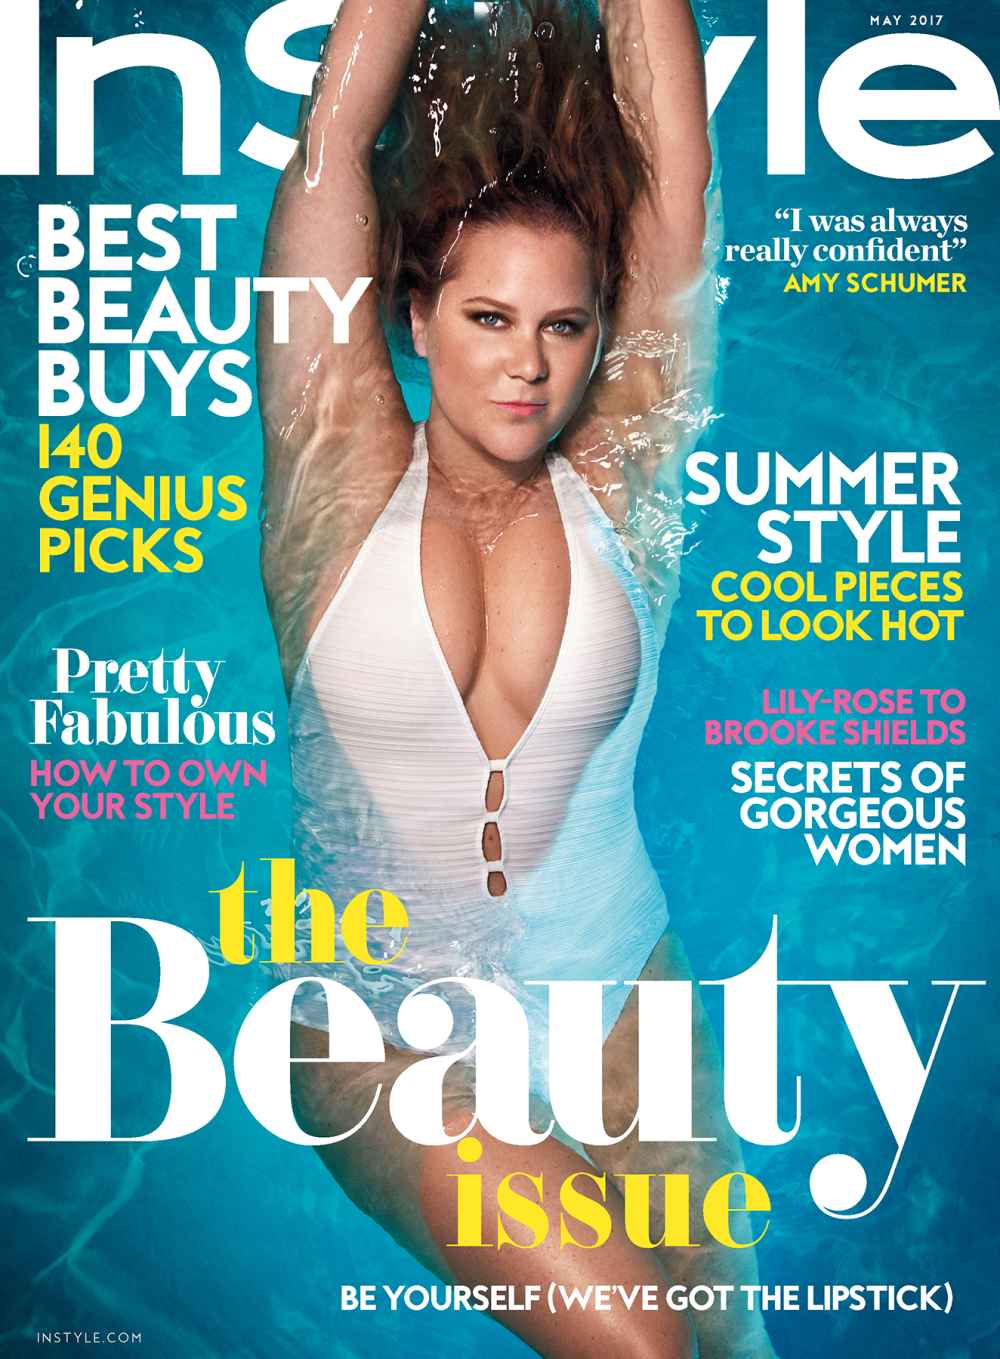 Amy Schumer for InStyle